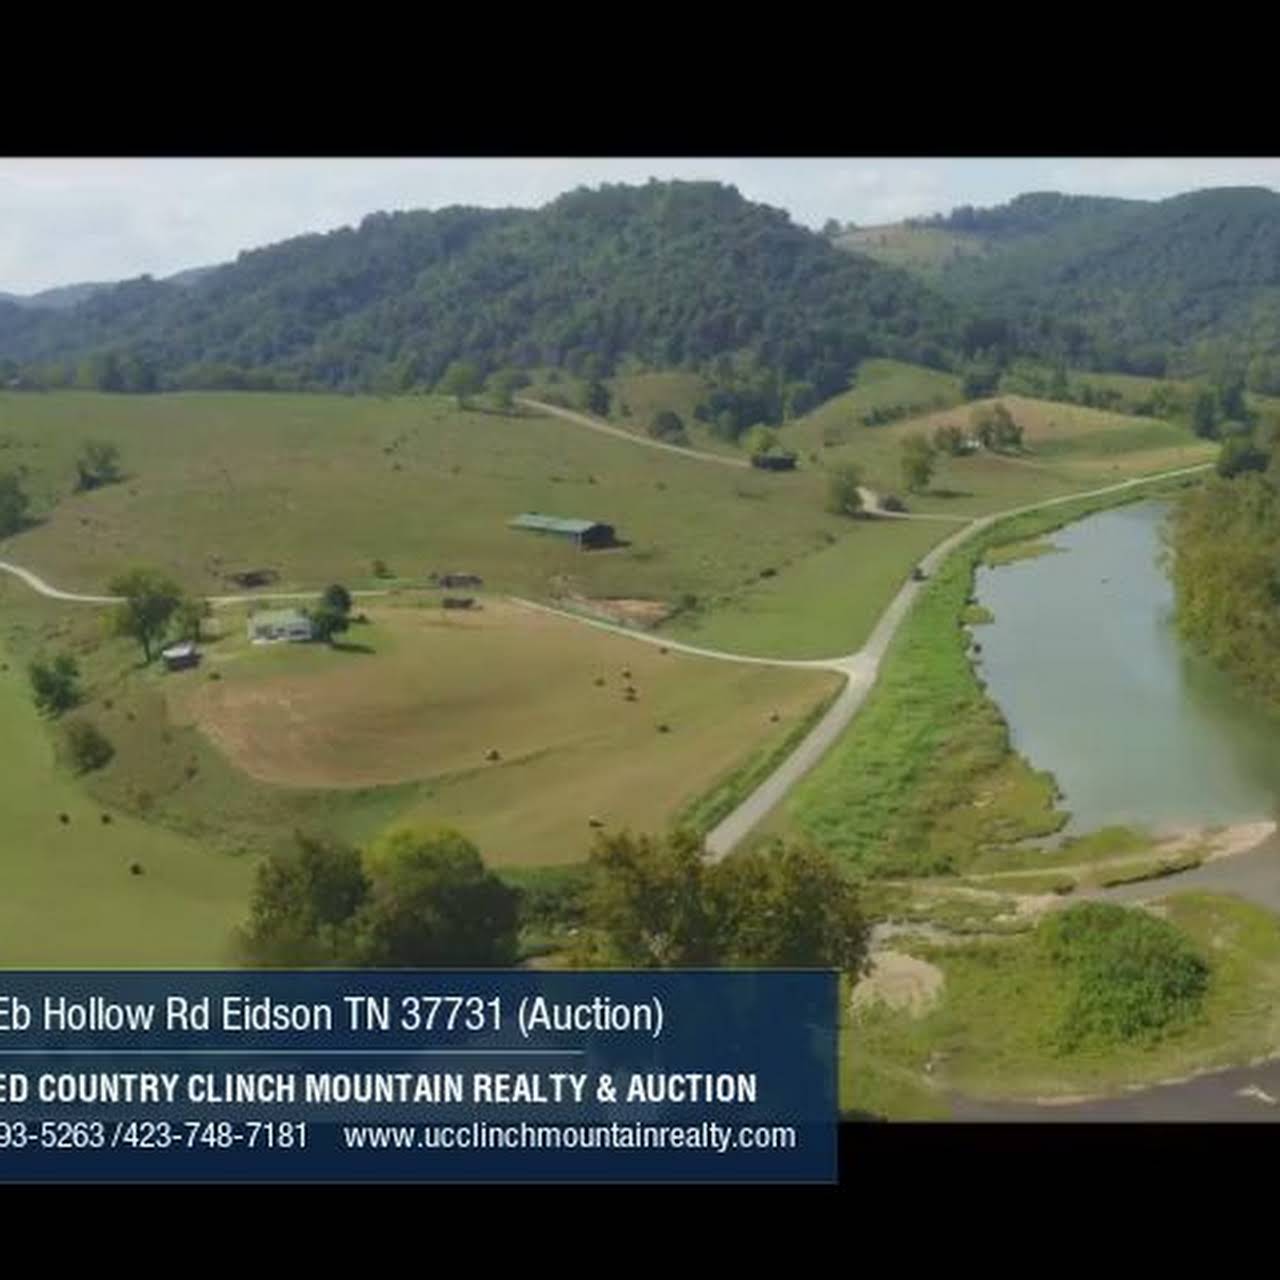 261 ACRES UNRESTRICTED BLISS ON THE CLINCH RIVER AUCTION TN